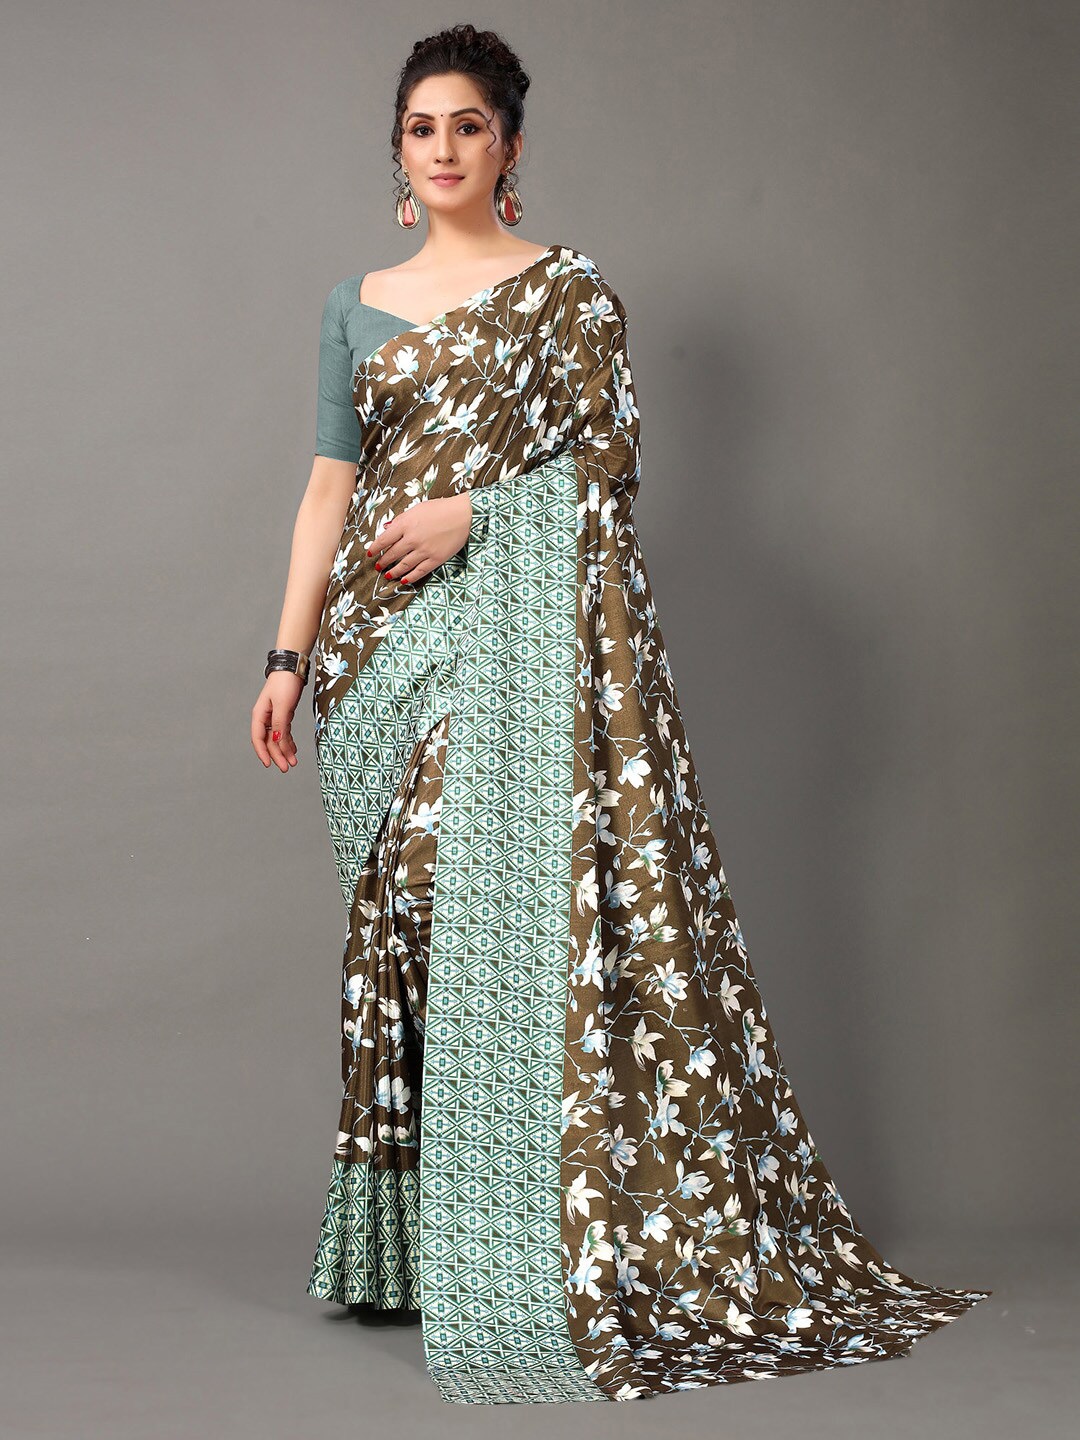 

KALINI Olive Green and White Floral Printed Georgette Saree